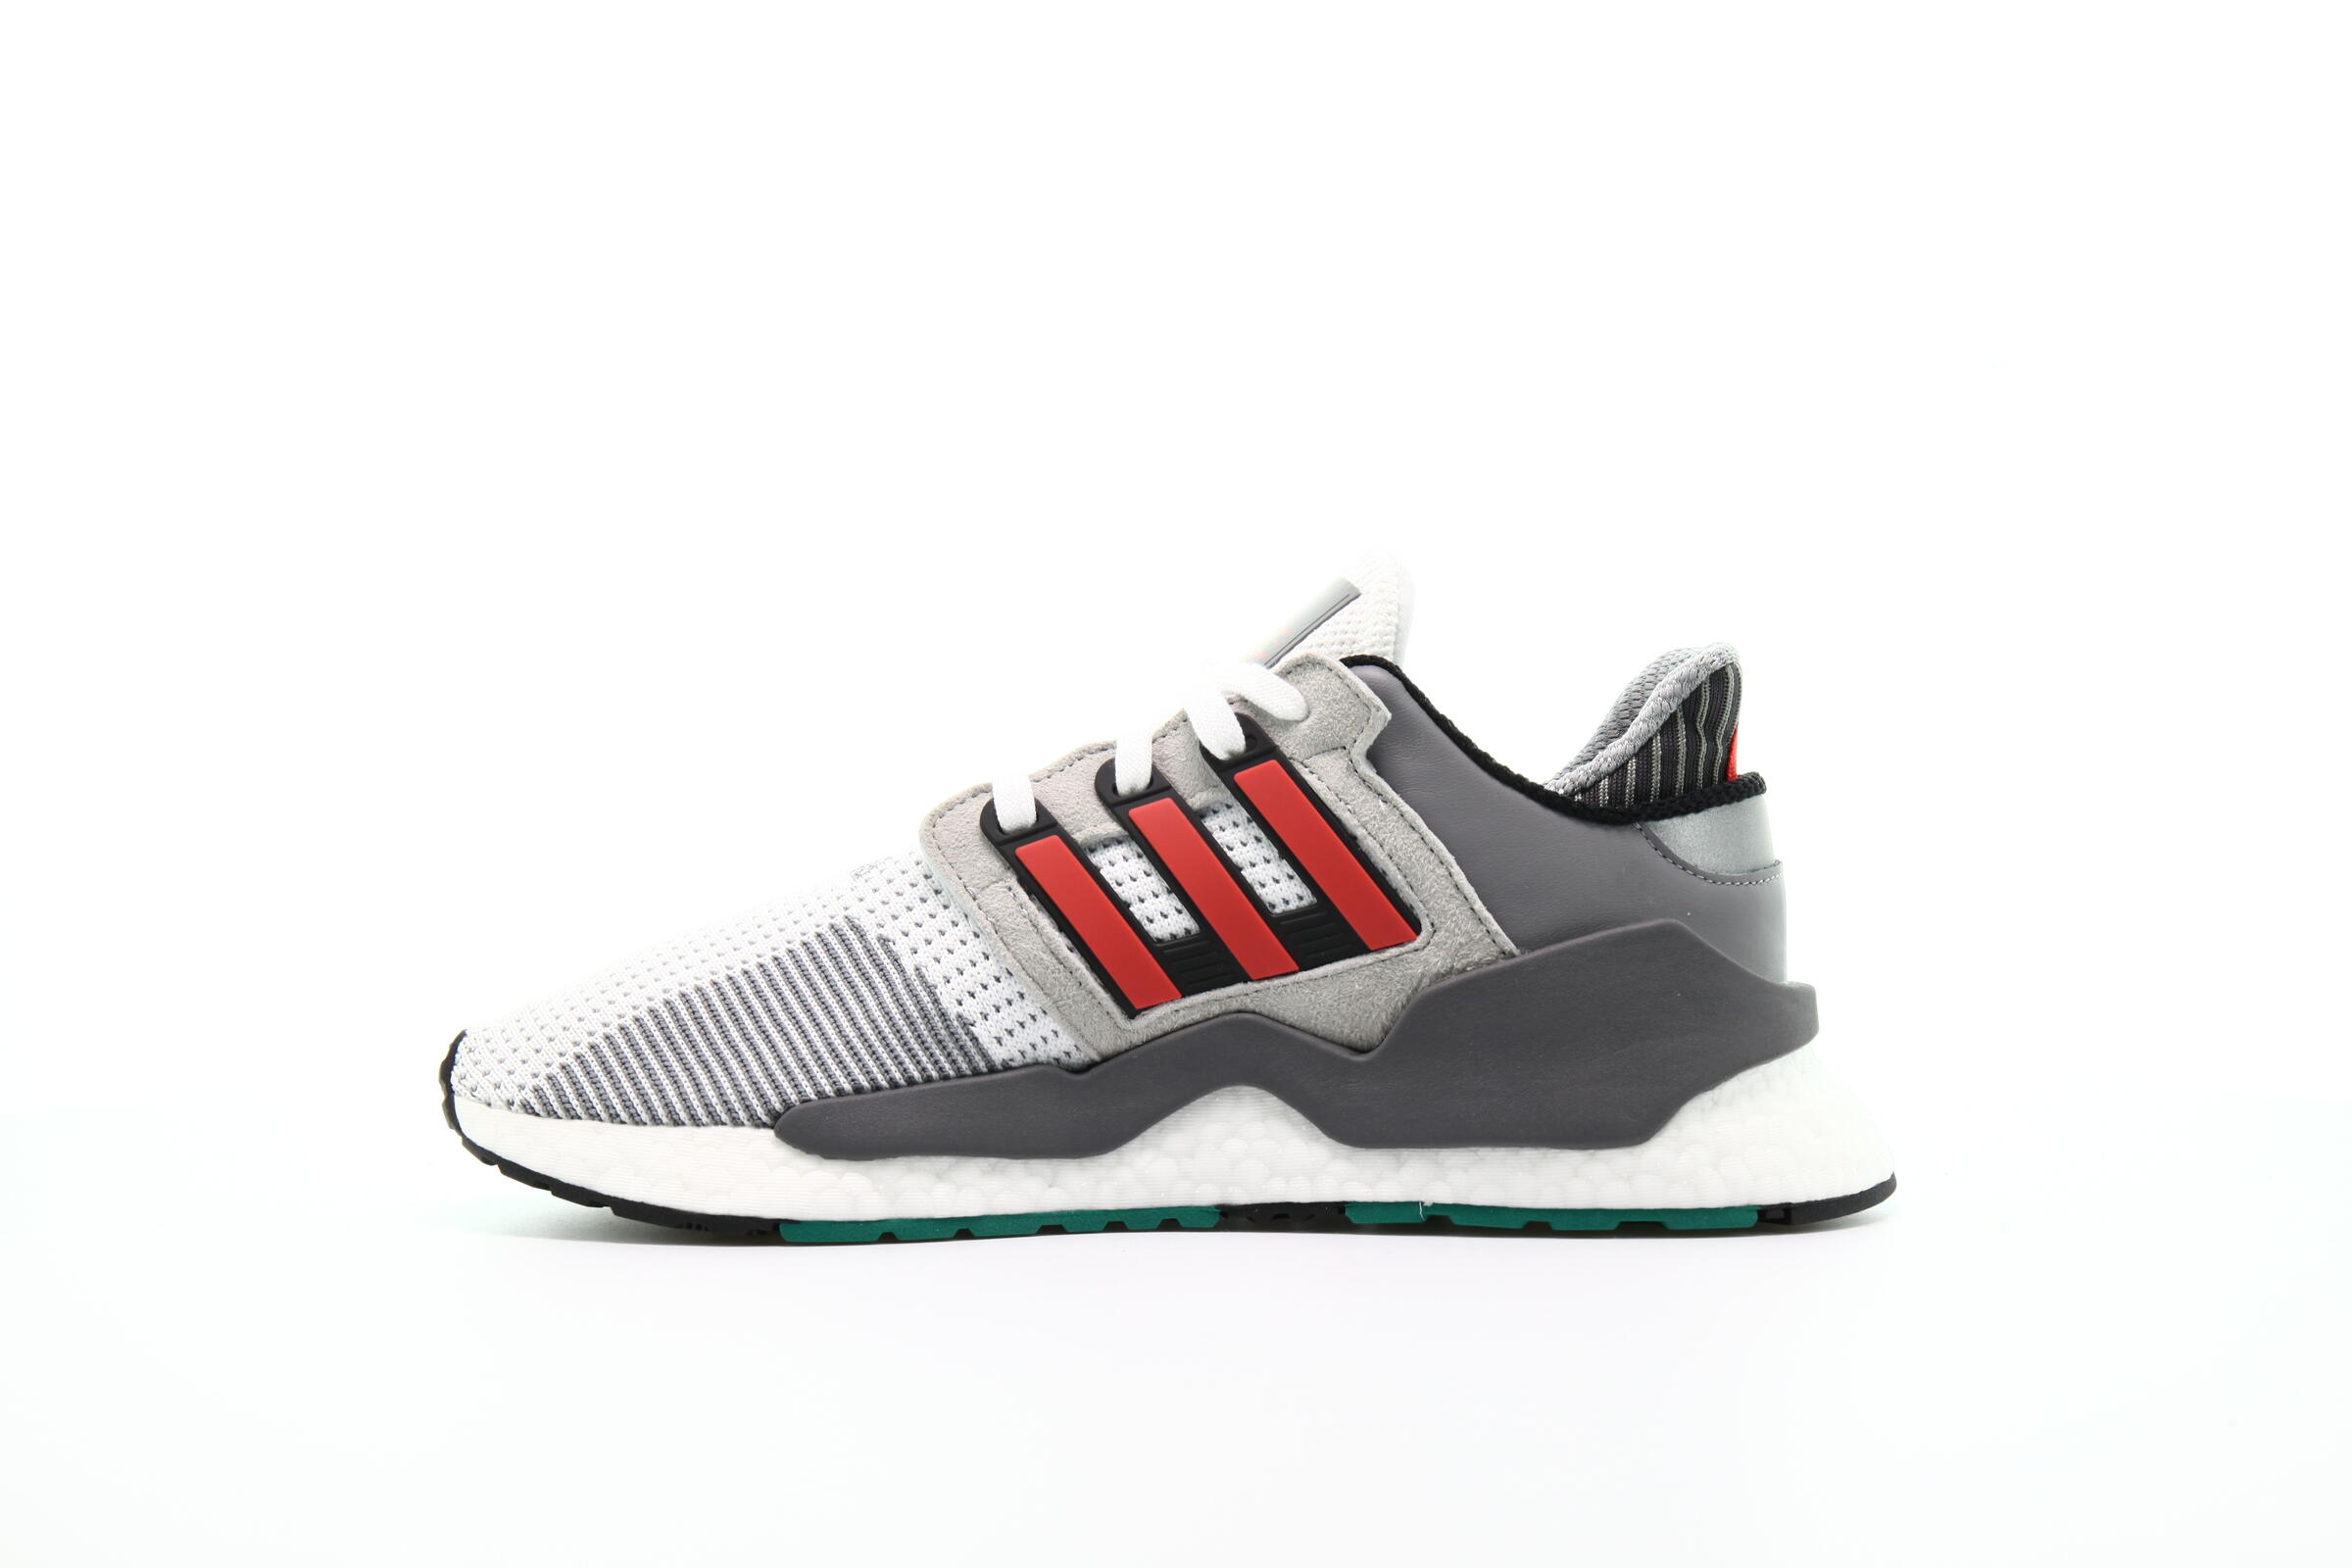 adidas Performance EQT Support 91/18 "White & Grey"